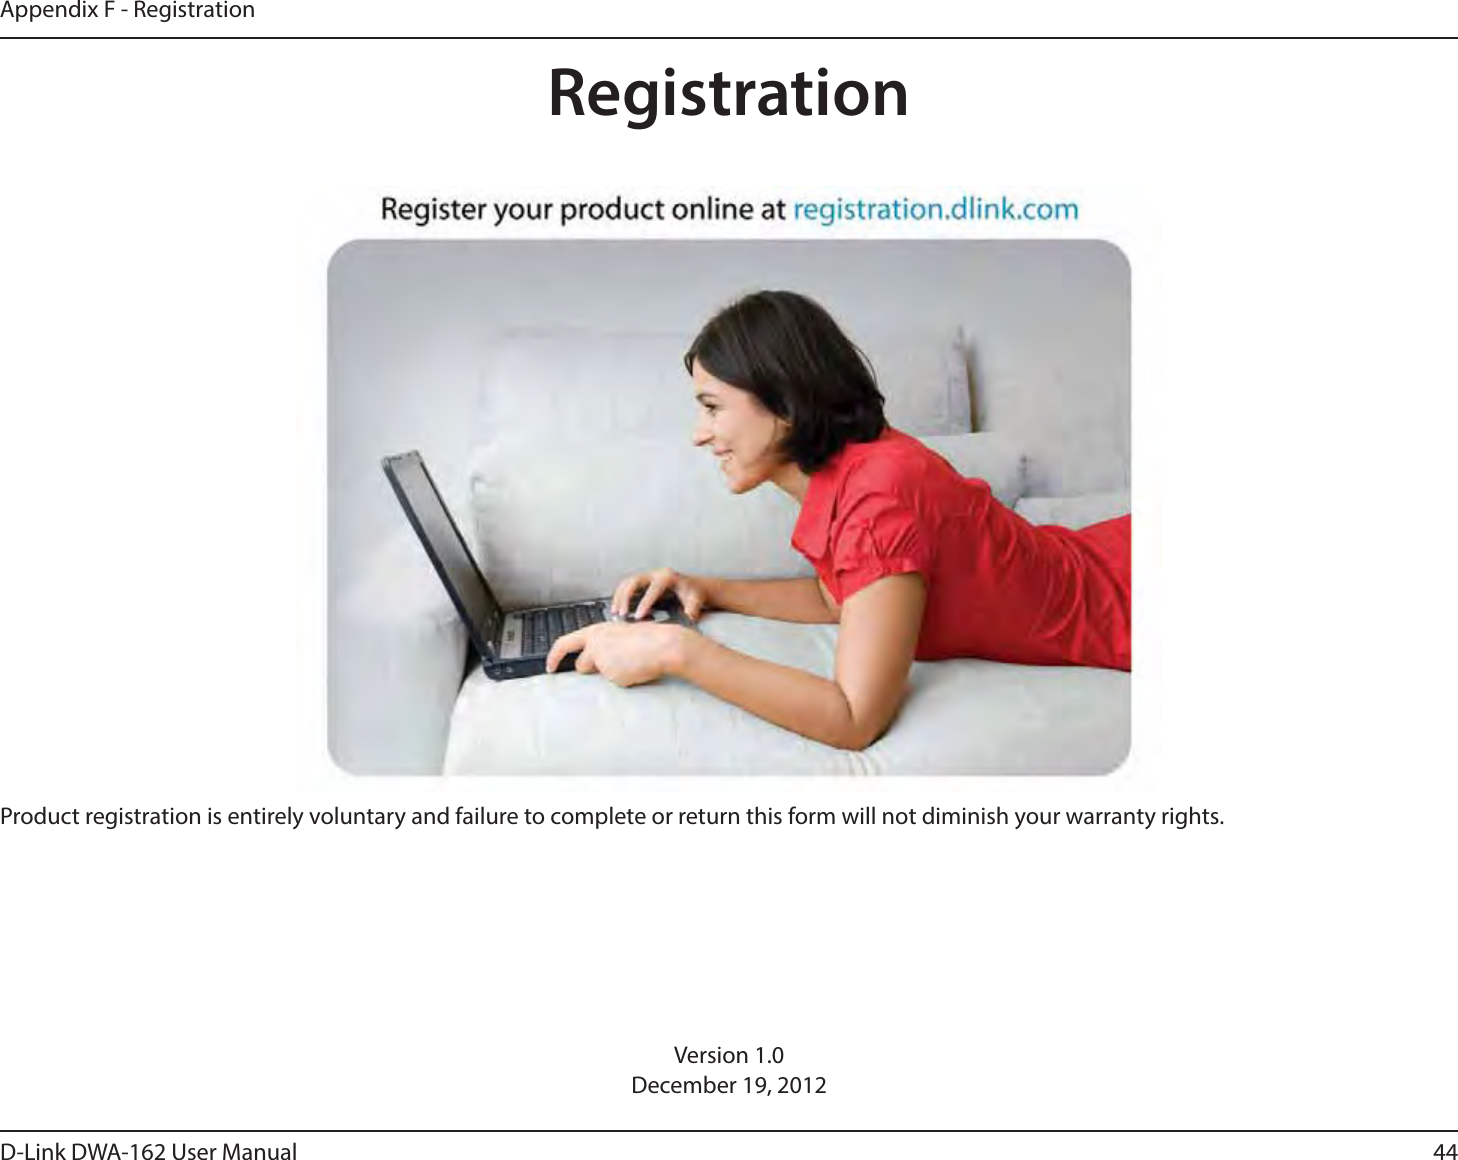 44D-Link DWA-162 User ManualAppendix F - RegistrationVersion 1.0December 19, 2012Product registration is entirely voluntary and failure to complete or return this form will not diminish your warranty rights.Registration